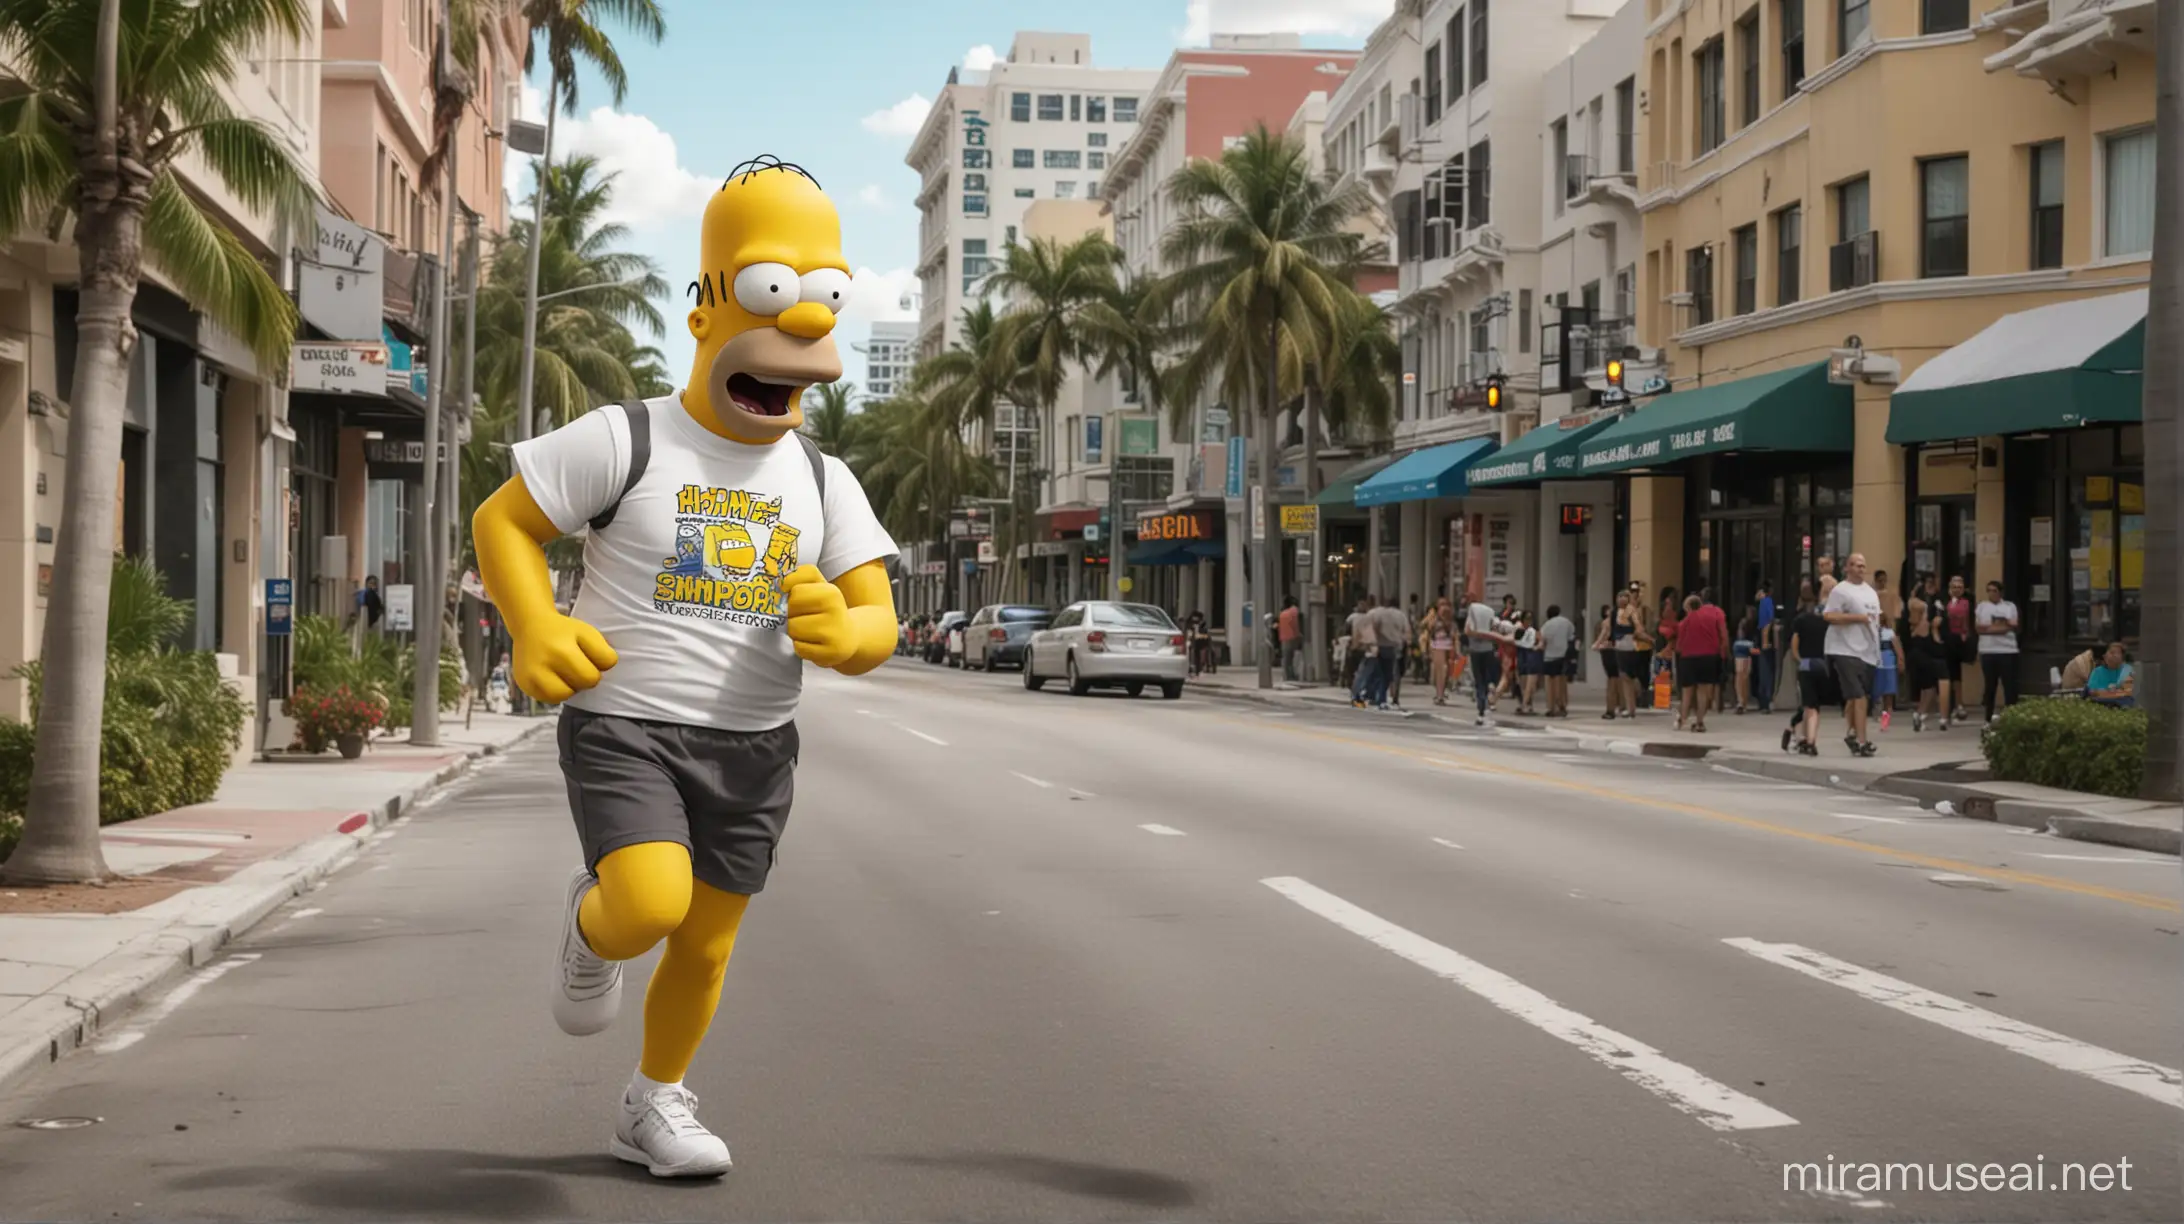 Create a animation poster "Homer Simpson Move for Hunger" and is seen Miami city buildings in the background and Homer Simpson is running a marathon, using his running outfit on the streets with a smiley face